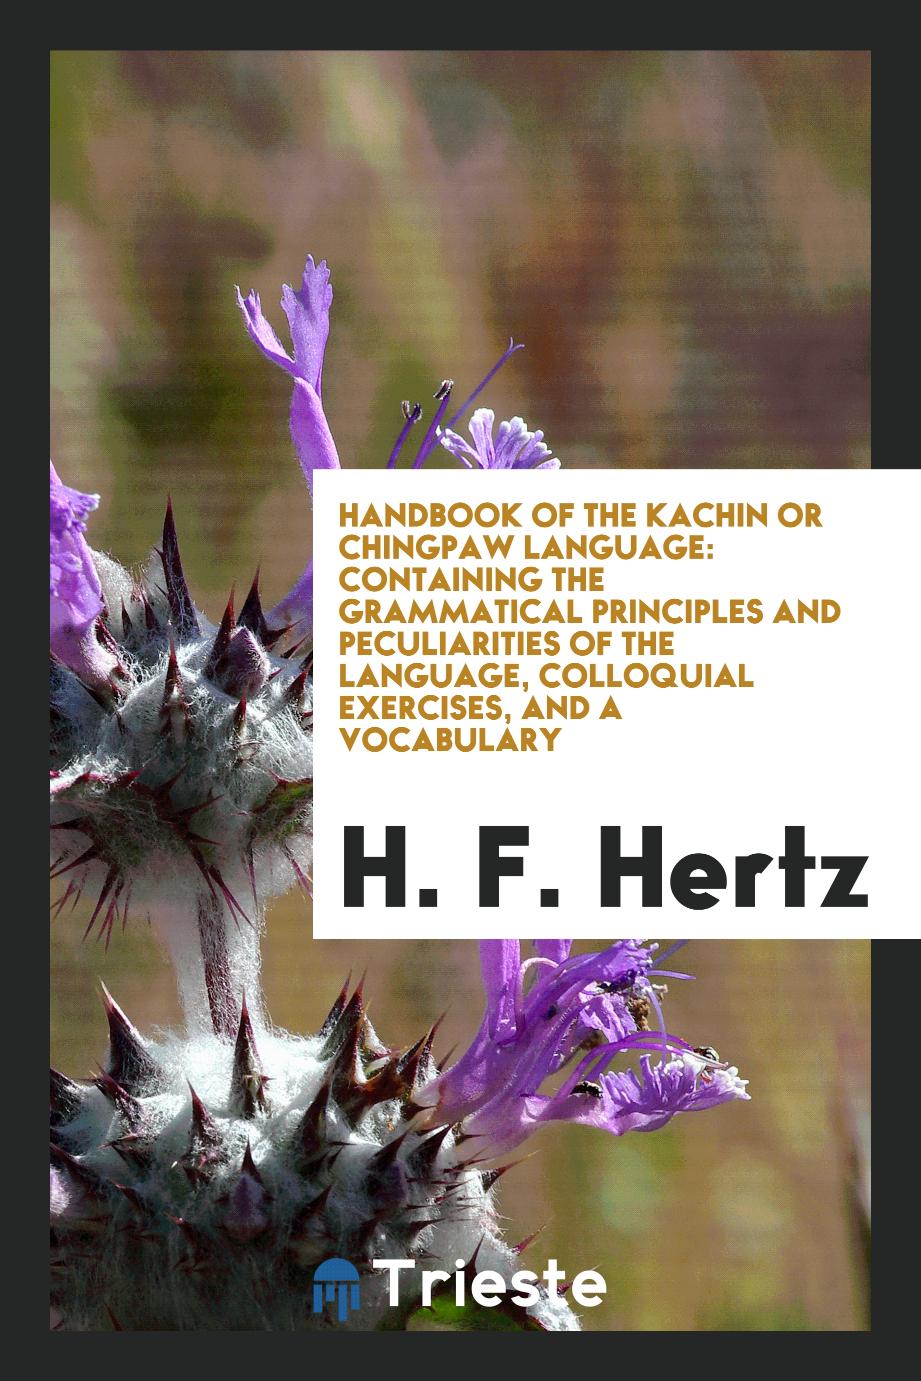 Handbook of the Kachin Or Chingpaw Language: Containing the Grammatical Principles and Peculiarities of the Language, Colloquial Exercises, and a Vocabulary